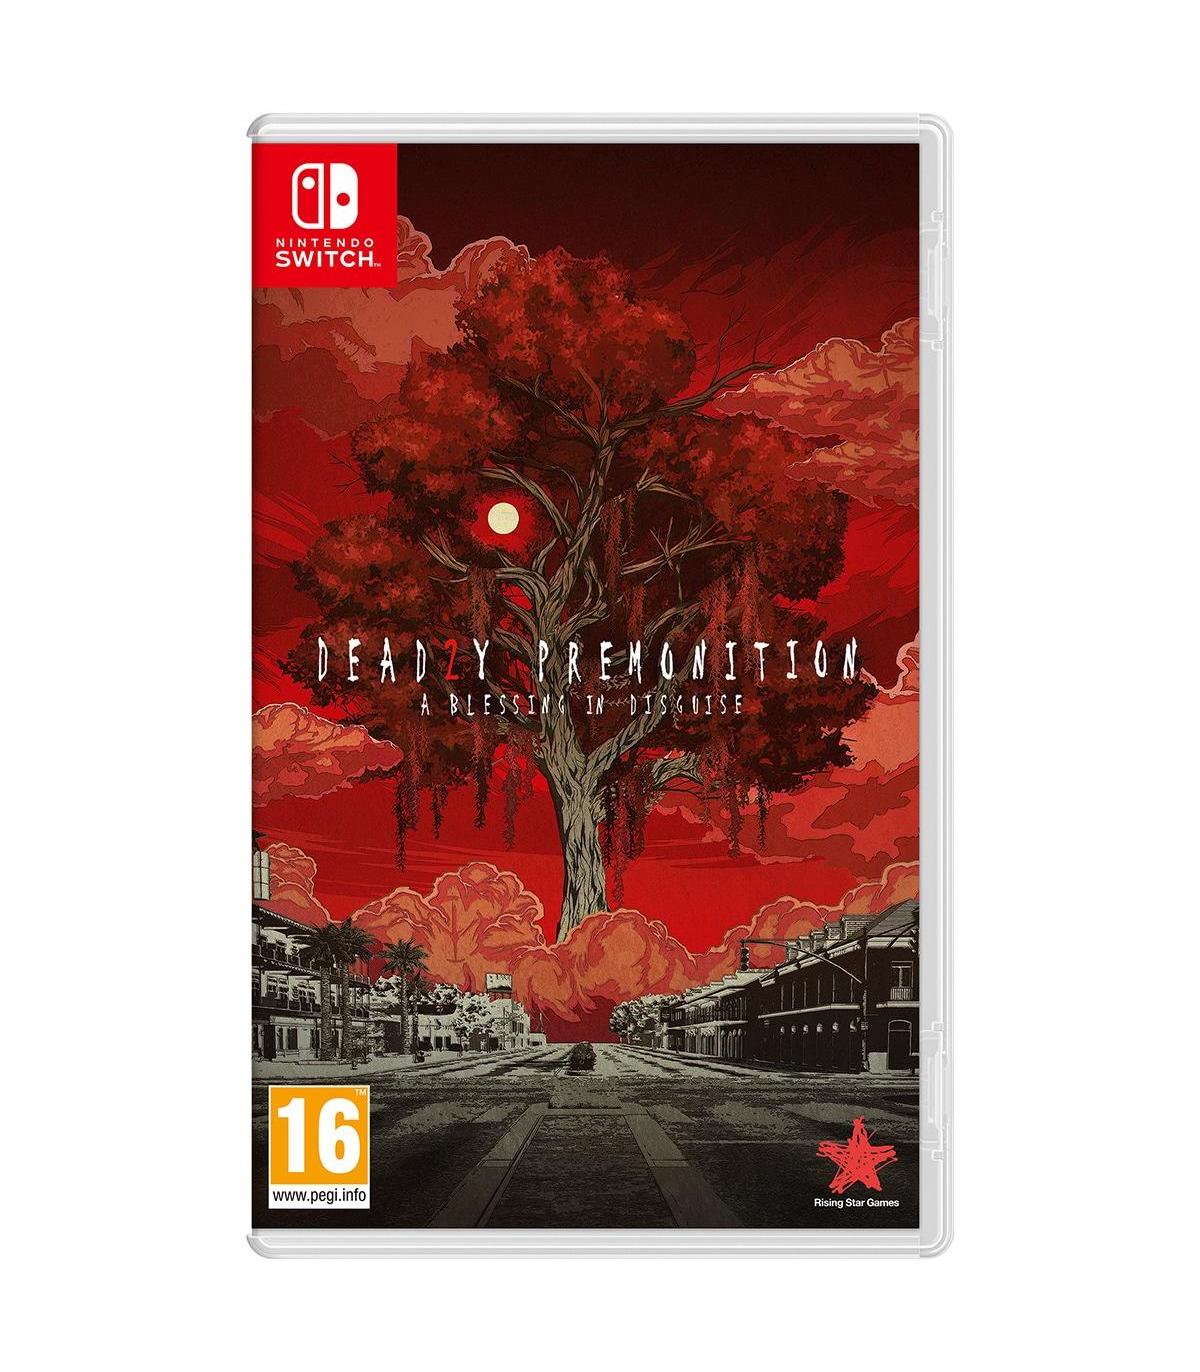 download deadly premonition 2 a blessing in disguise switch